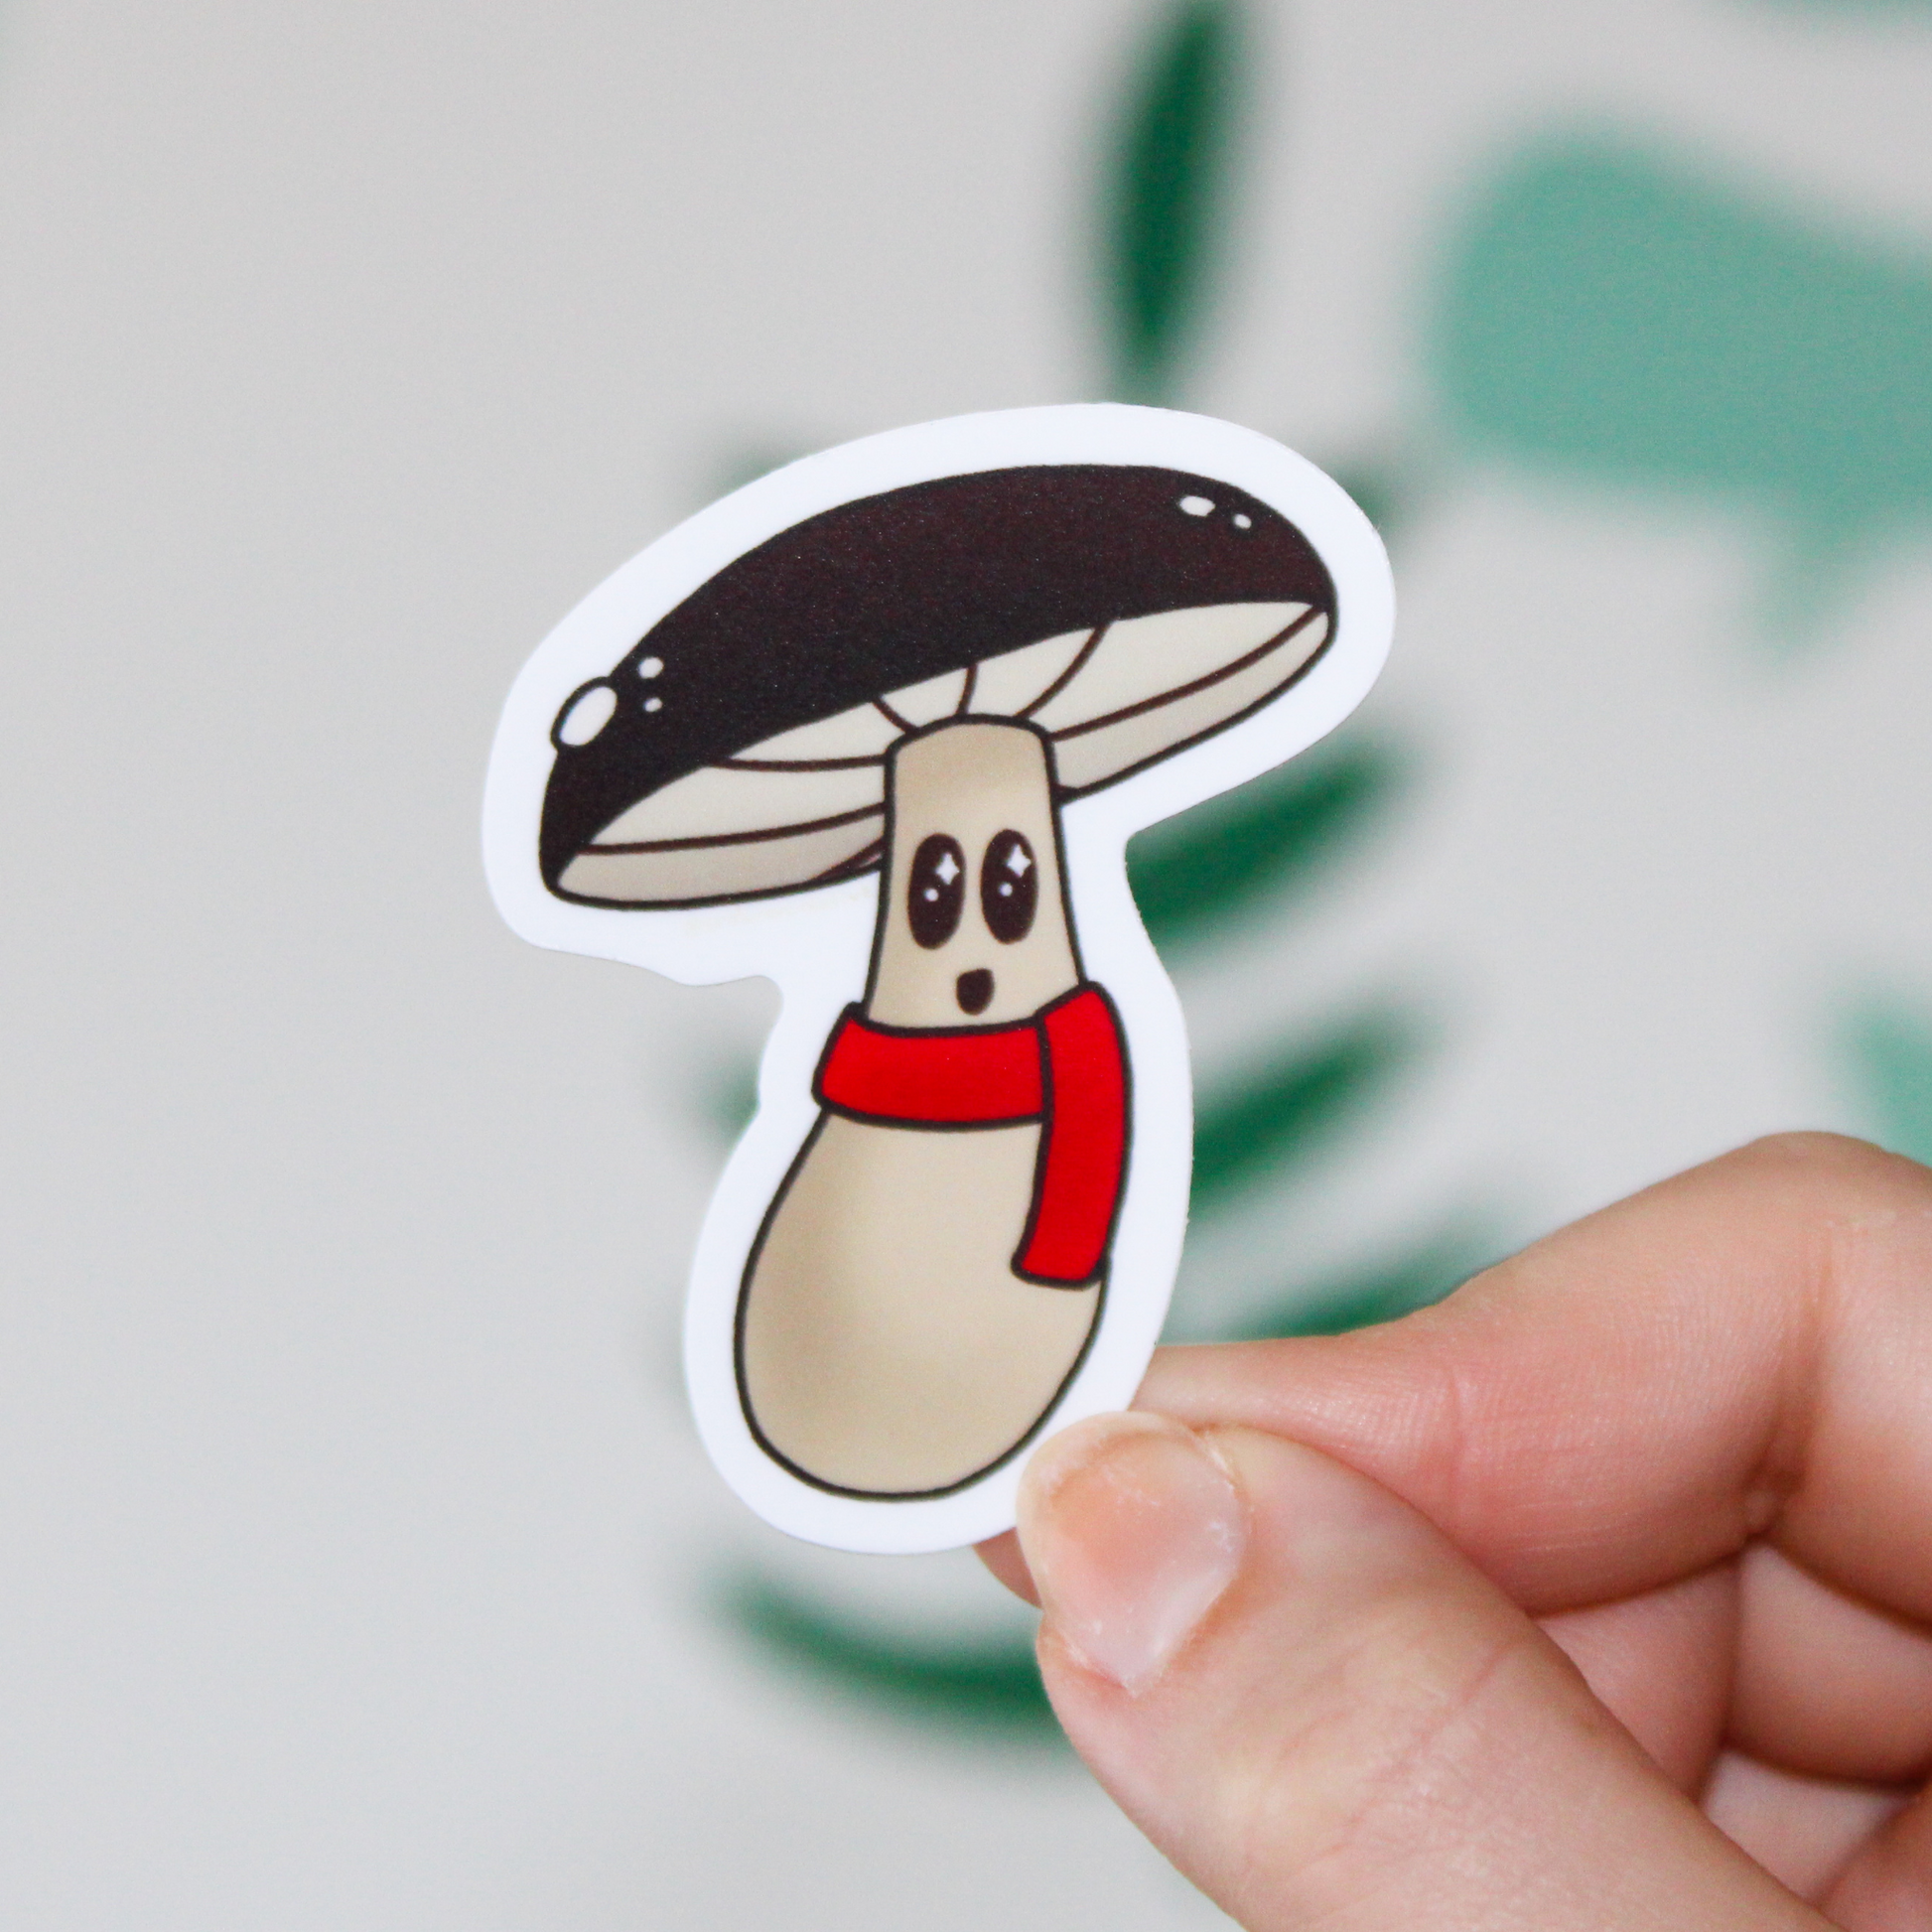 A blurred leaf background. In the front is a hand holding a mushroom sticker with a brown cap, smiling face, and a red scarf.